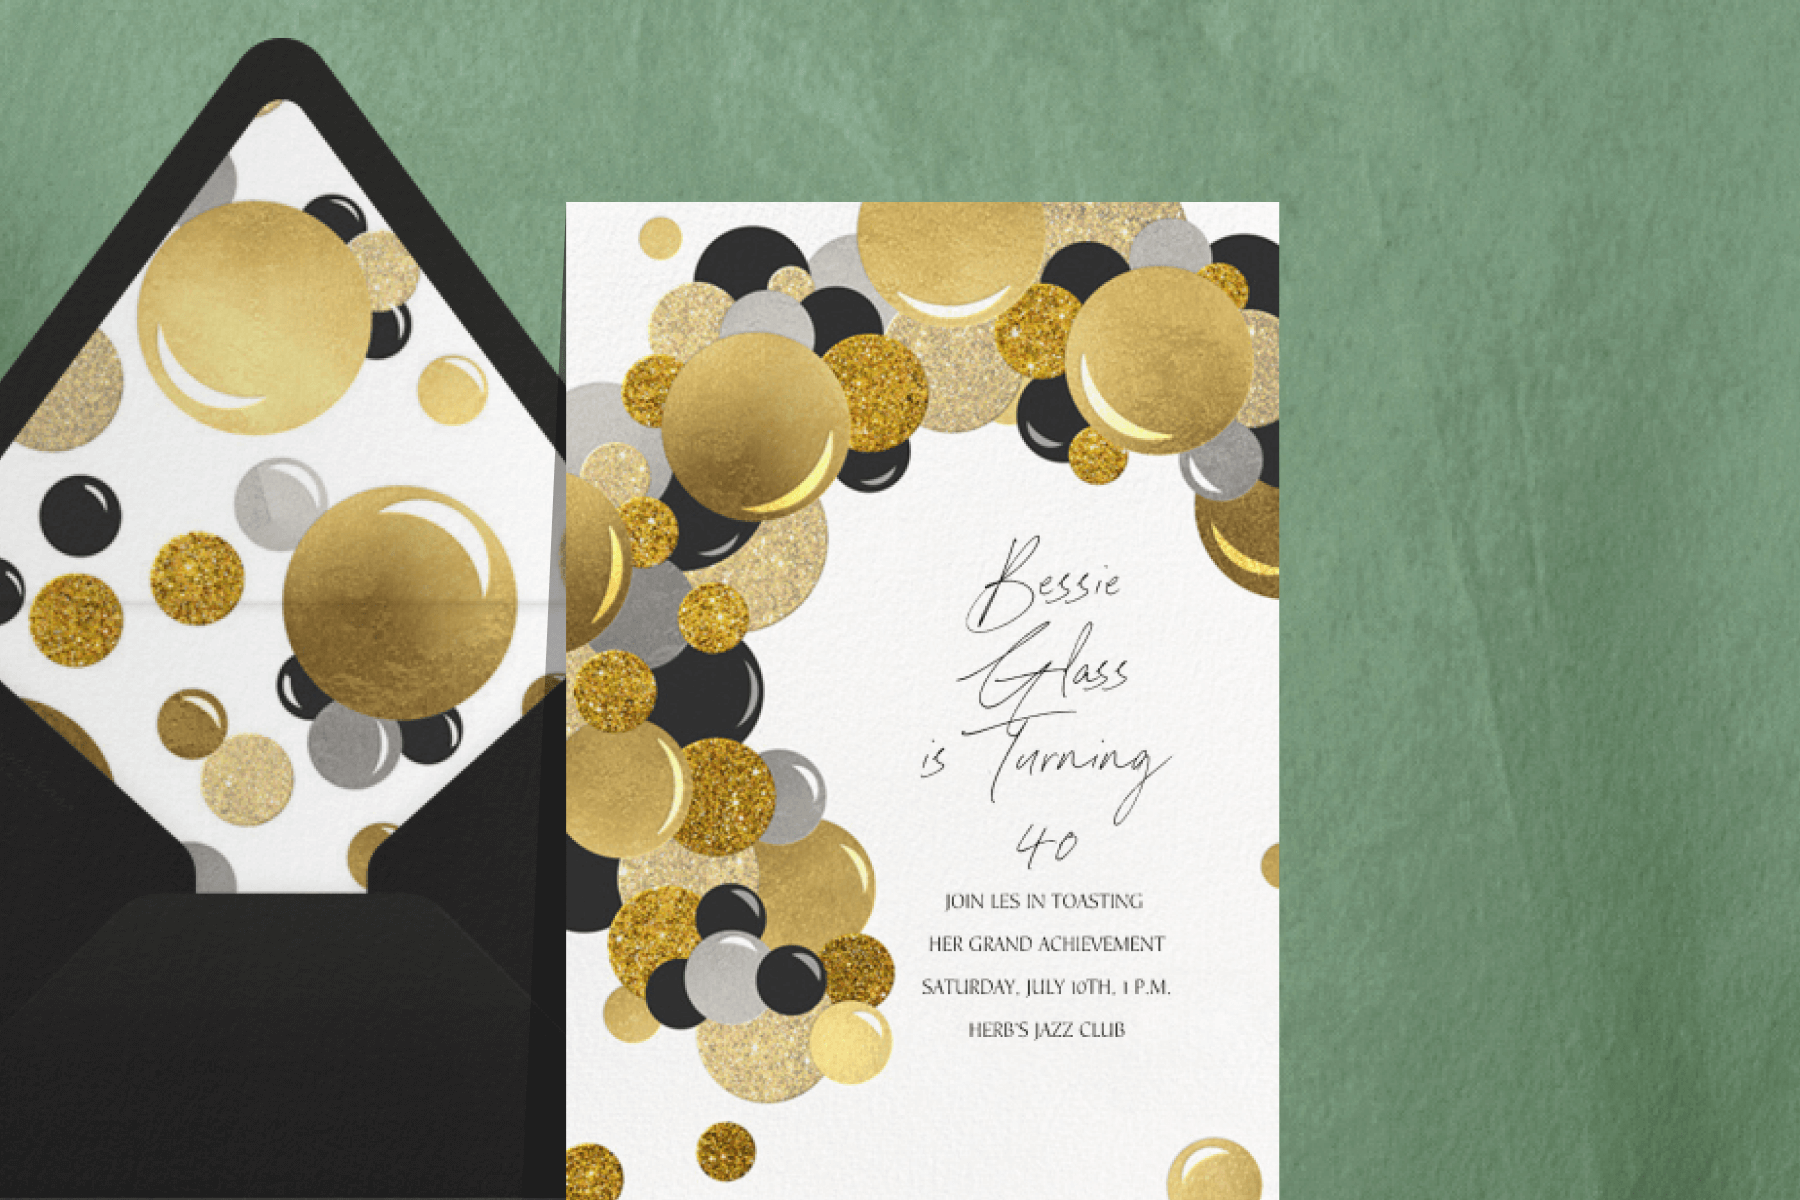 An adult birthday invitation featuring gold, silver, and black balloons.